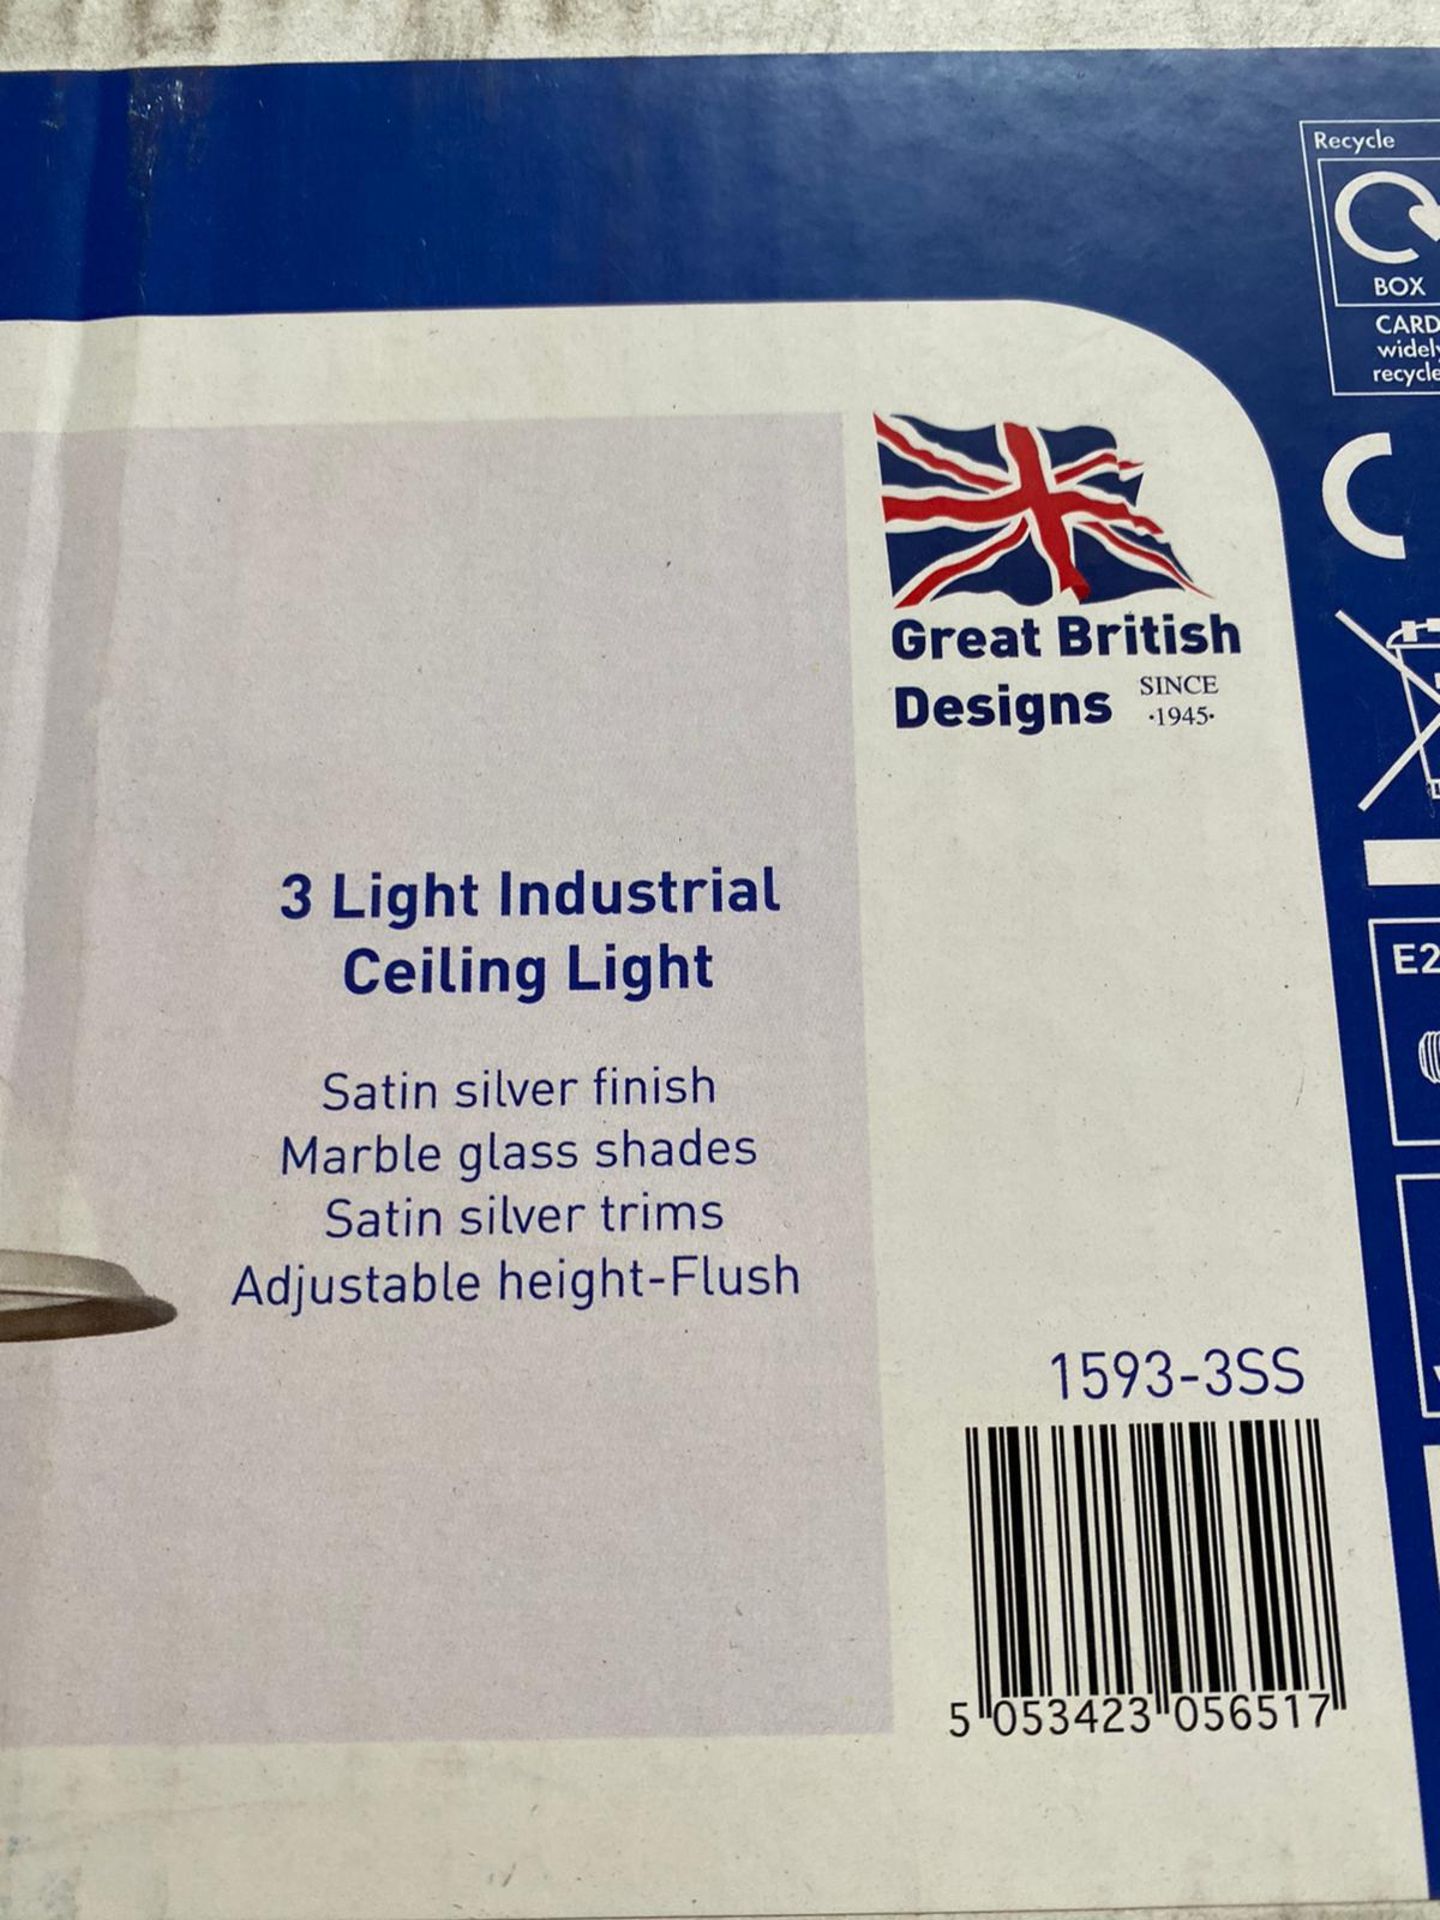 1 x Searchlight Industrial Ceiling Light in satin silver - Ref: 1593-3SS - New and Boxed - RRP: £10 - Image 3 of 4